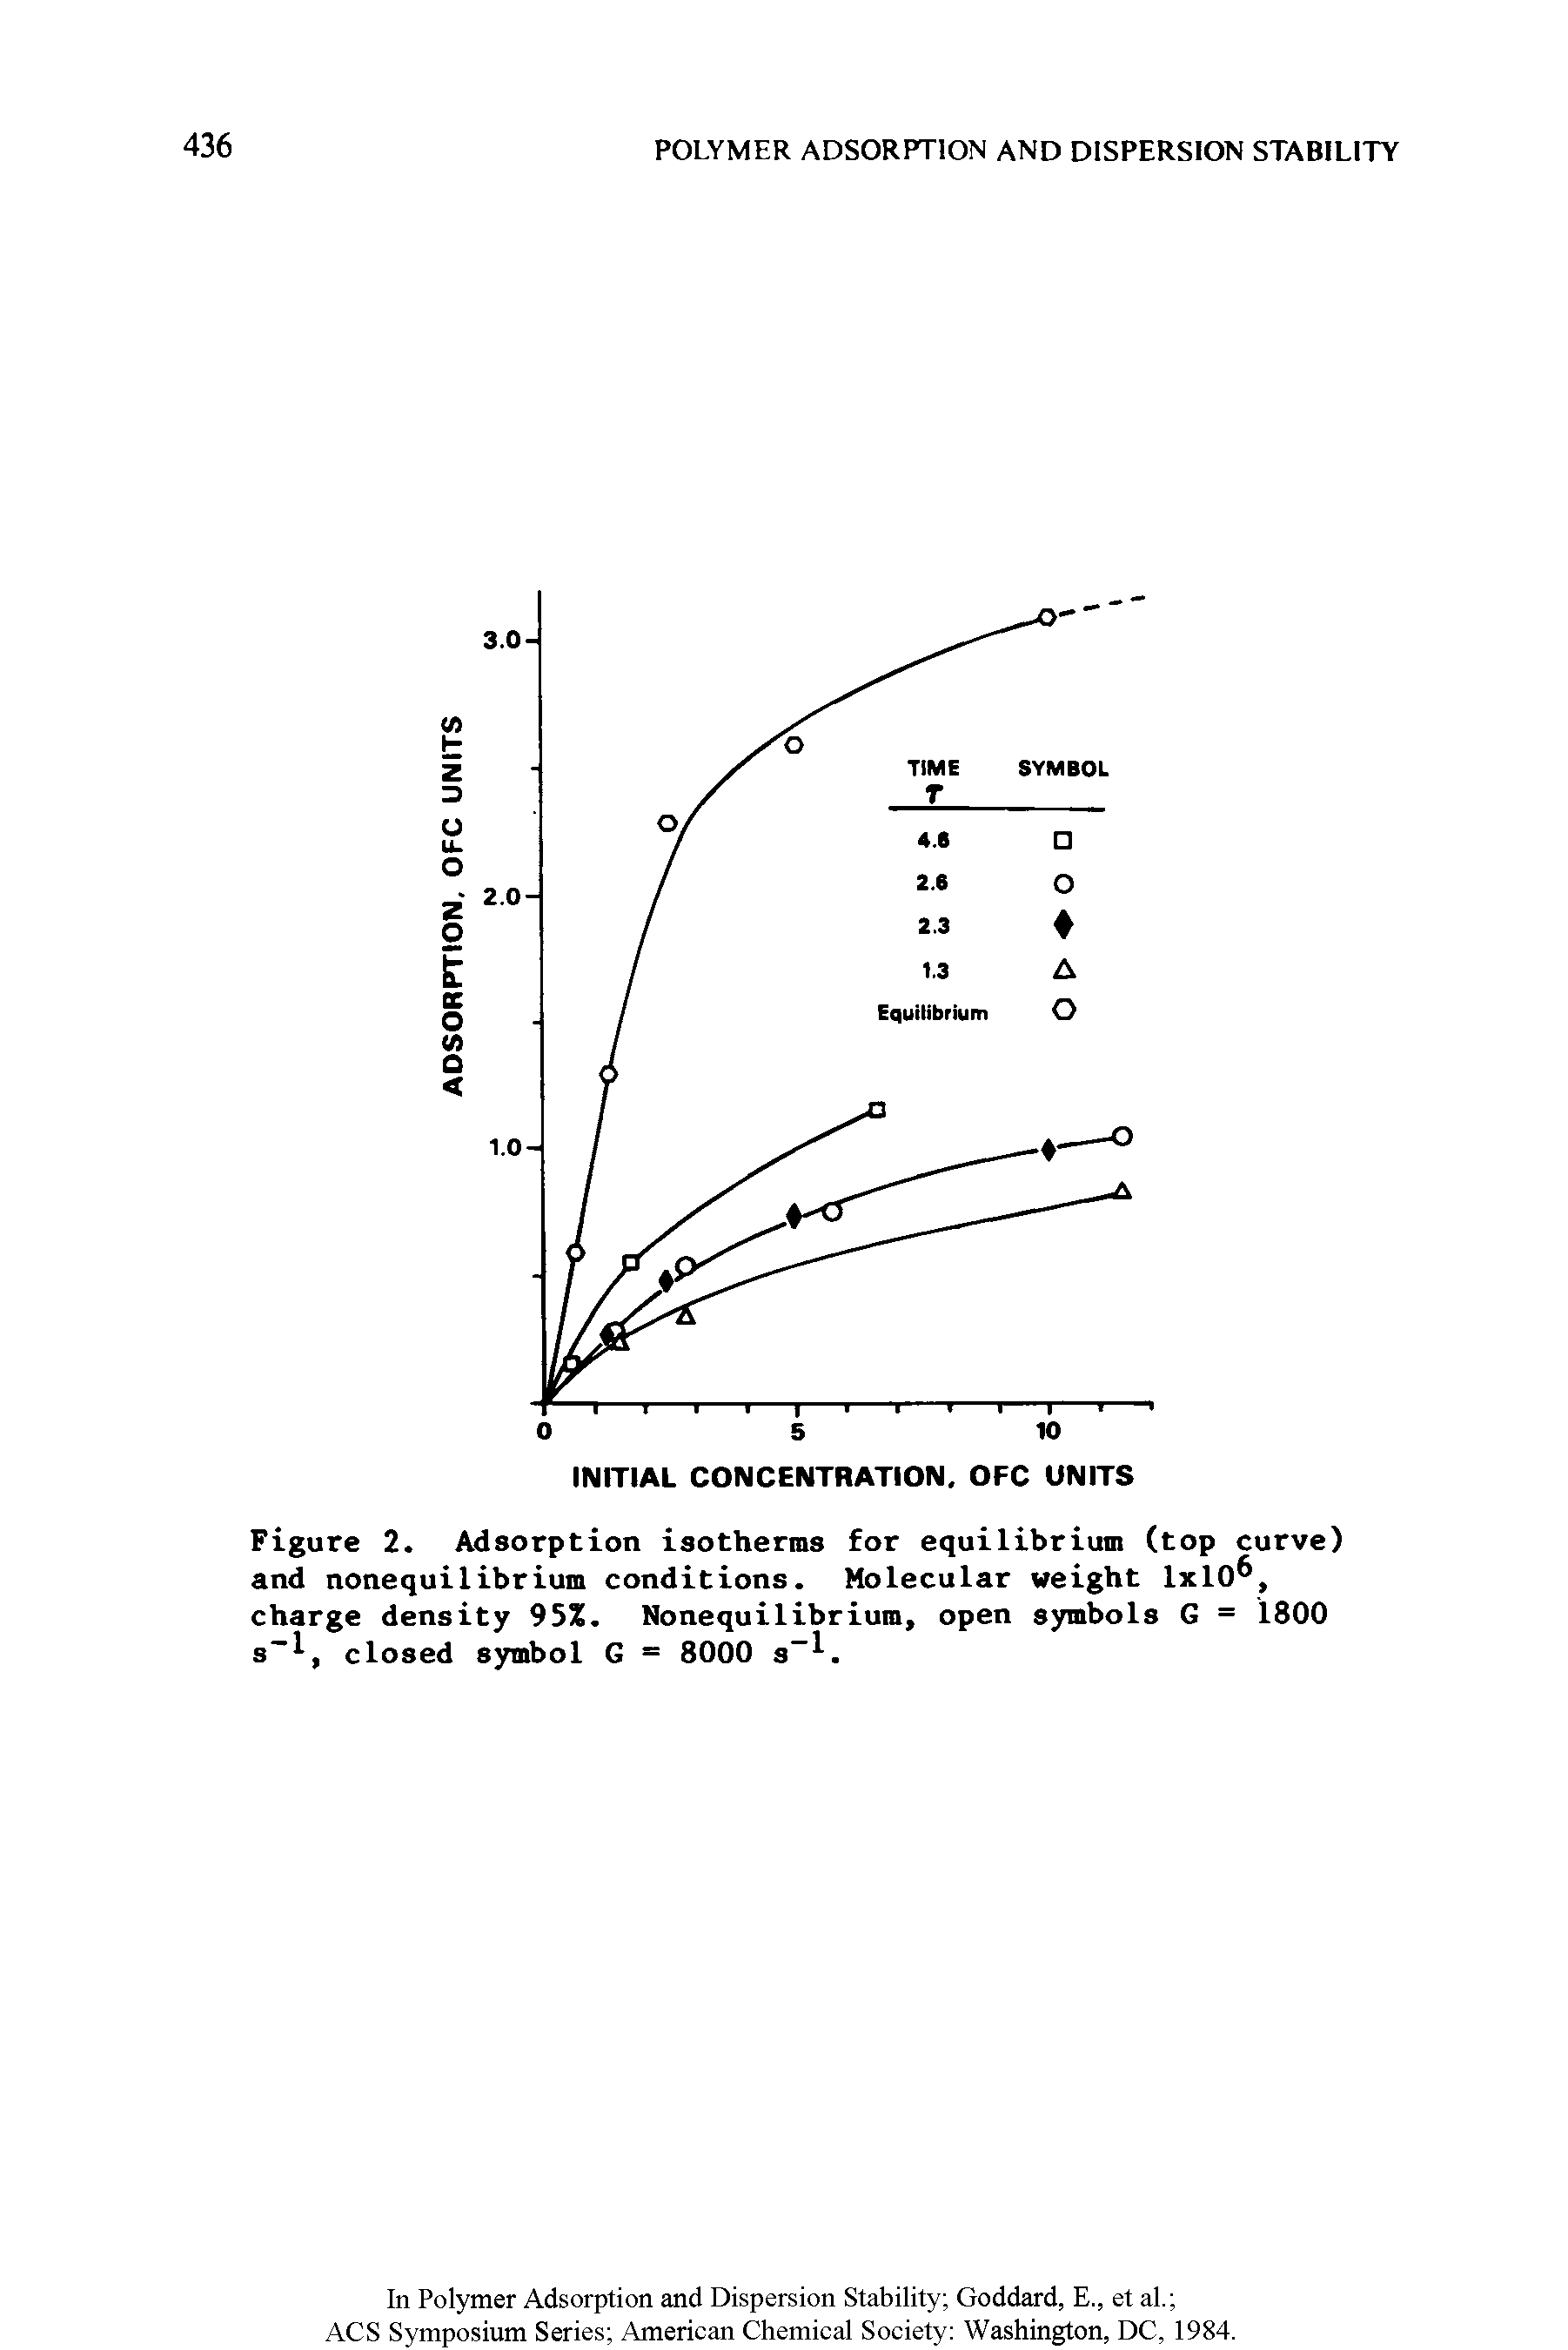 Figure 2. Adsorption isotherms for equilibrium (top curve) and nonequilibrium conditions. Molecular weight 1x10, charge density 95%. Nonequilibrium, open symbols G = 1800 s 1, closed symbol G = 8000 s-1.